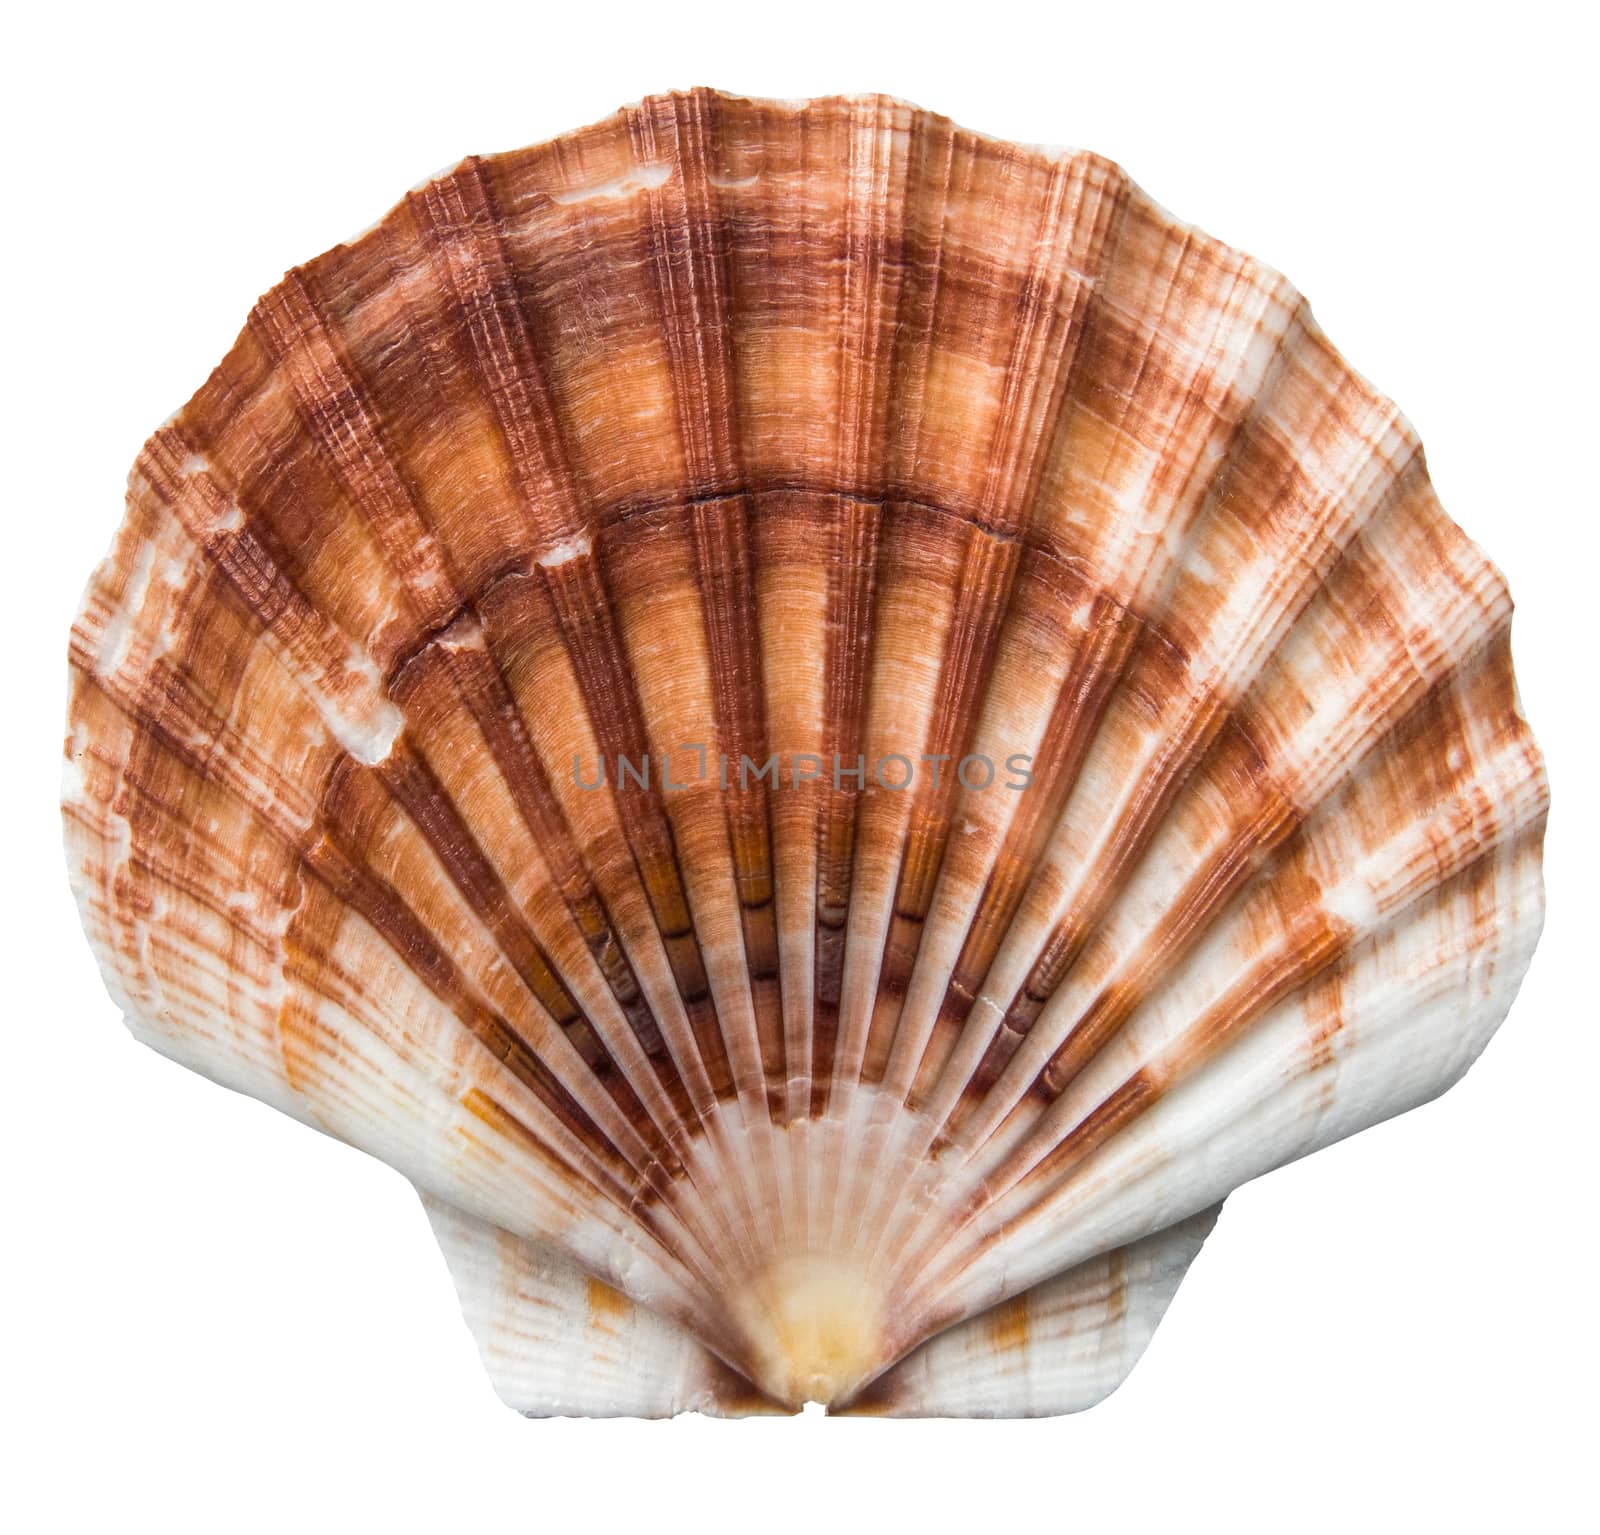 Isolated Brown Scallops Shell by mrdoomits